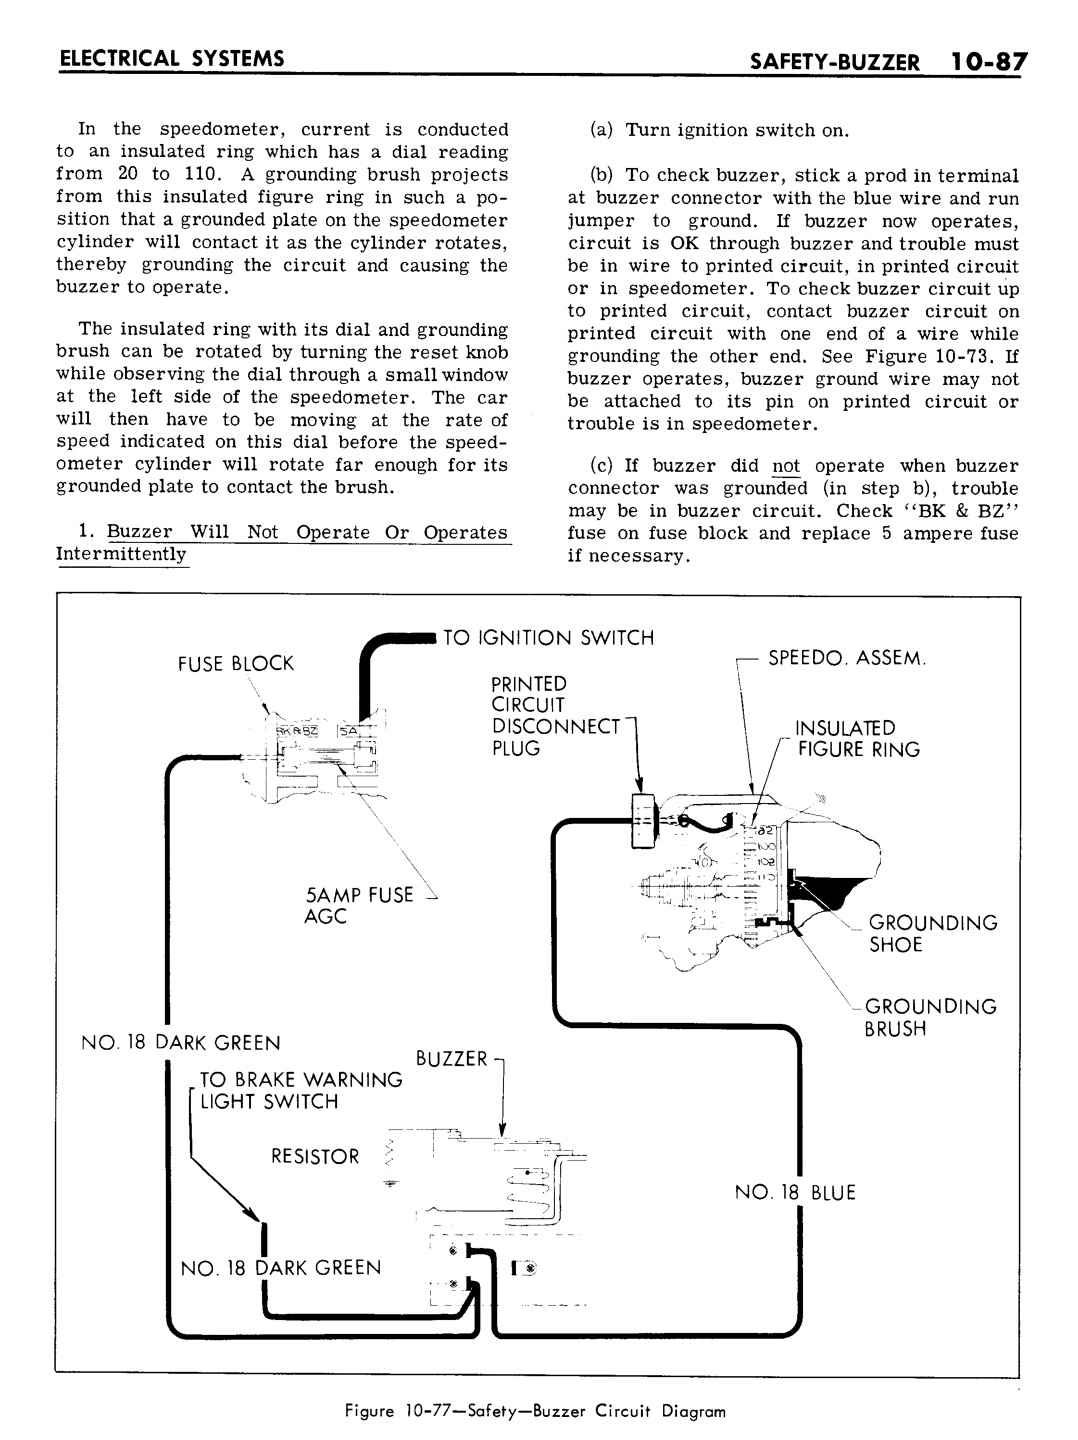 n_10 1961 Buick Shop Manual - Electrical Systems-087-087.jpg